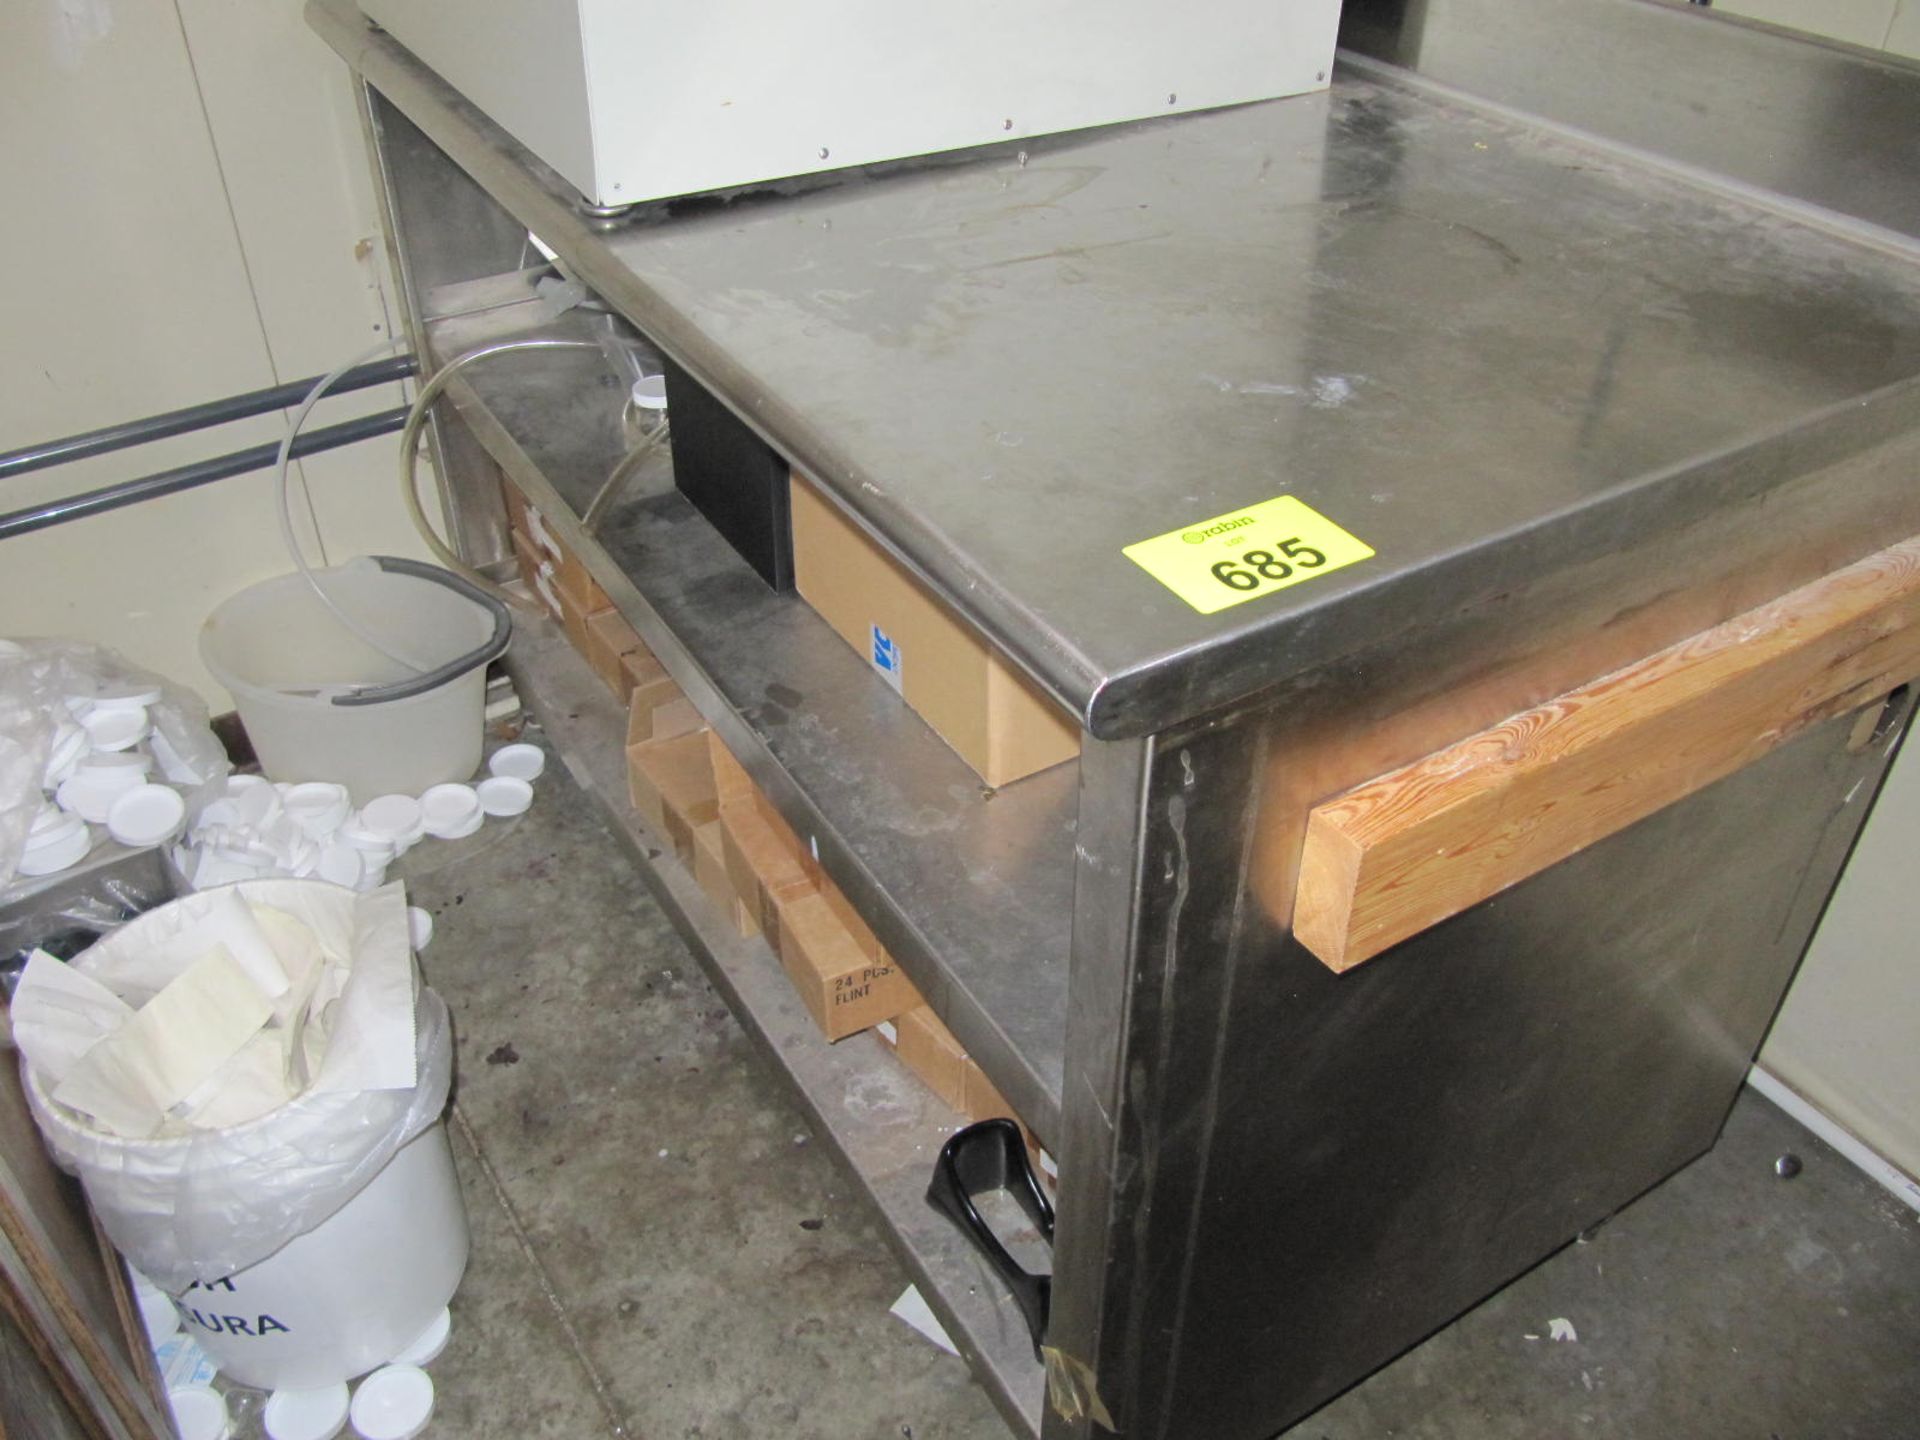 Stainless work table, 57" x 30" x 38" tall with (2) lower shelves|Bidding is subject to breaking the